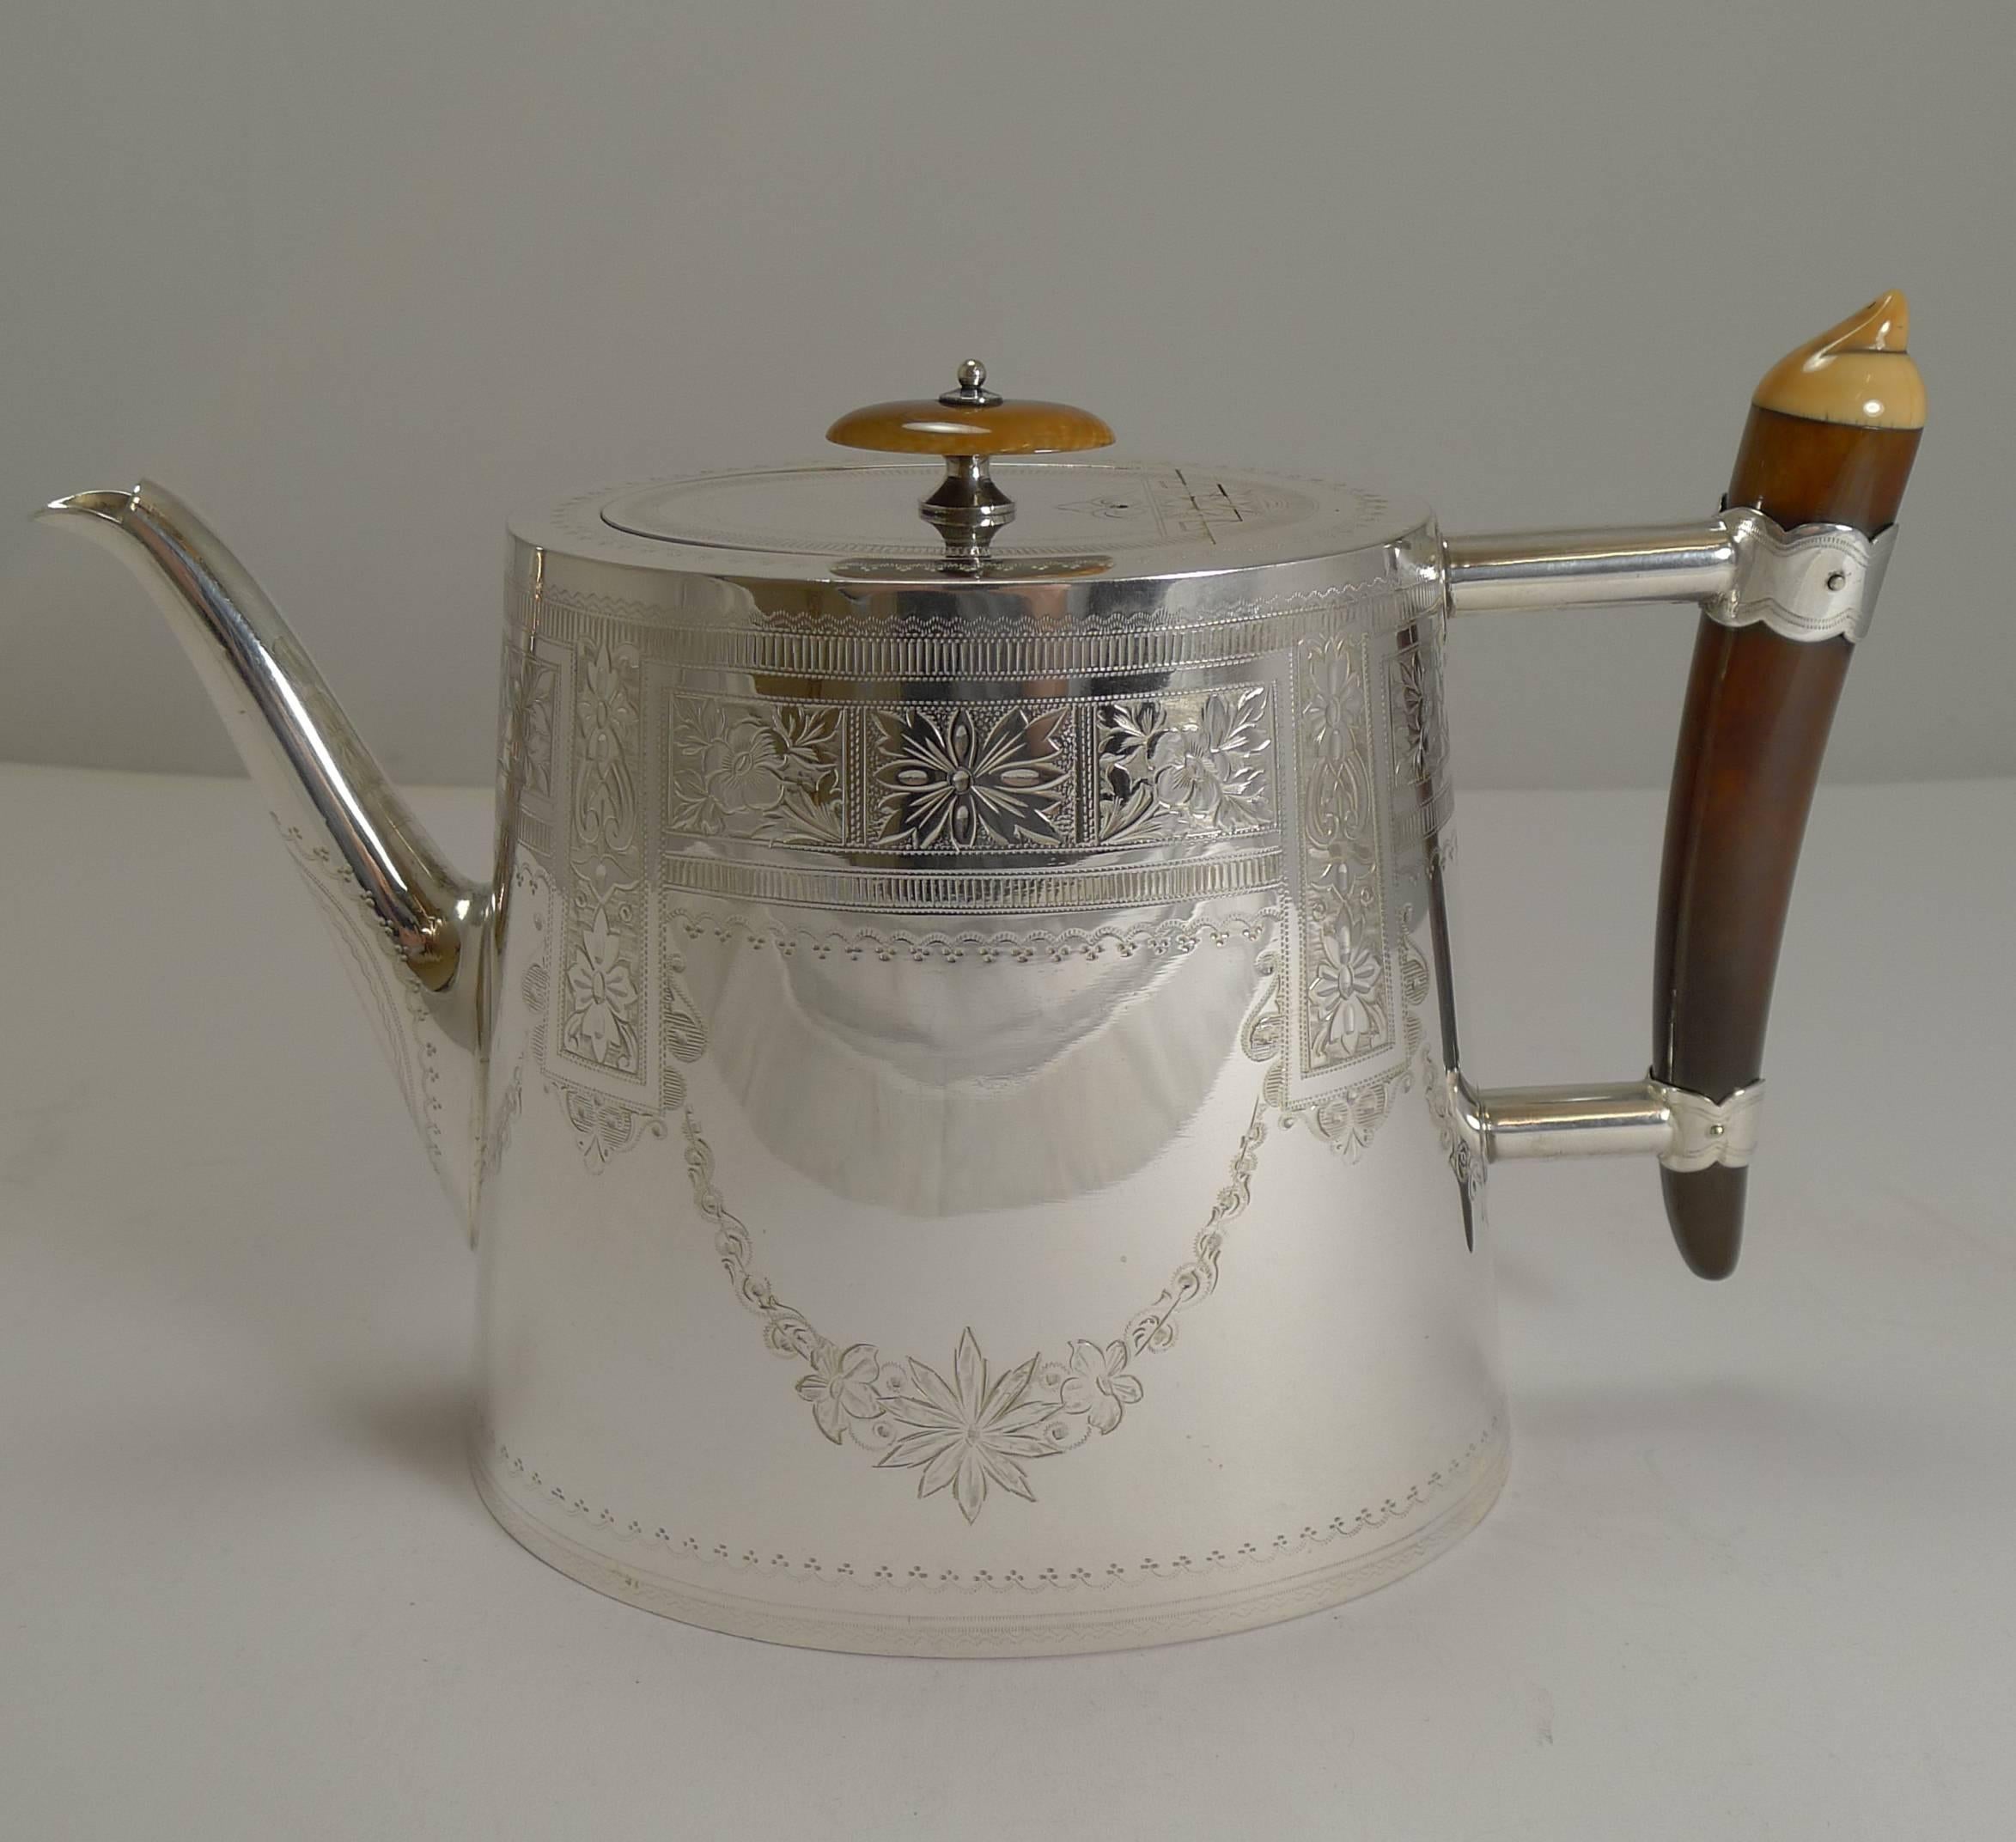 A most unusual and very stylish three piece tea service made from English EPNS (Electro-Plated Nickel Silver) and dating to circa 1890-1900, late Victorian in era.

The set is lovely quality in an ovoid form, the teapot with a top-notch flush